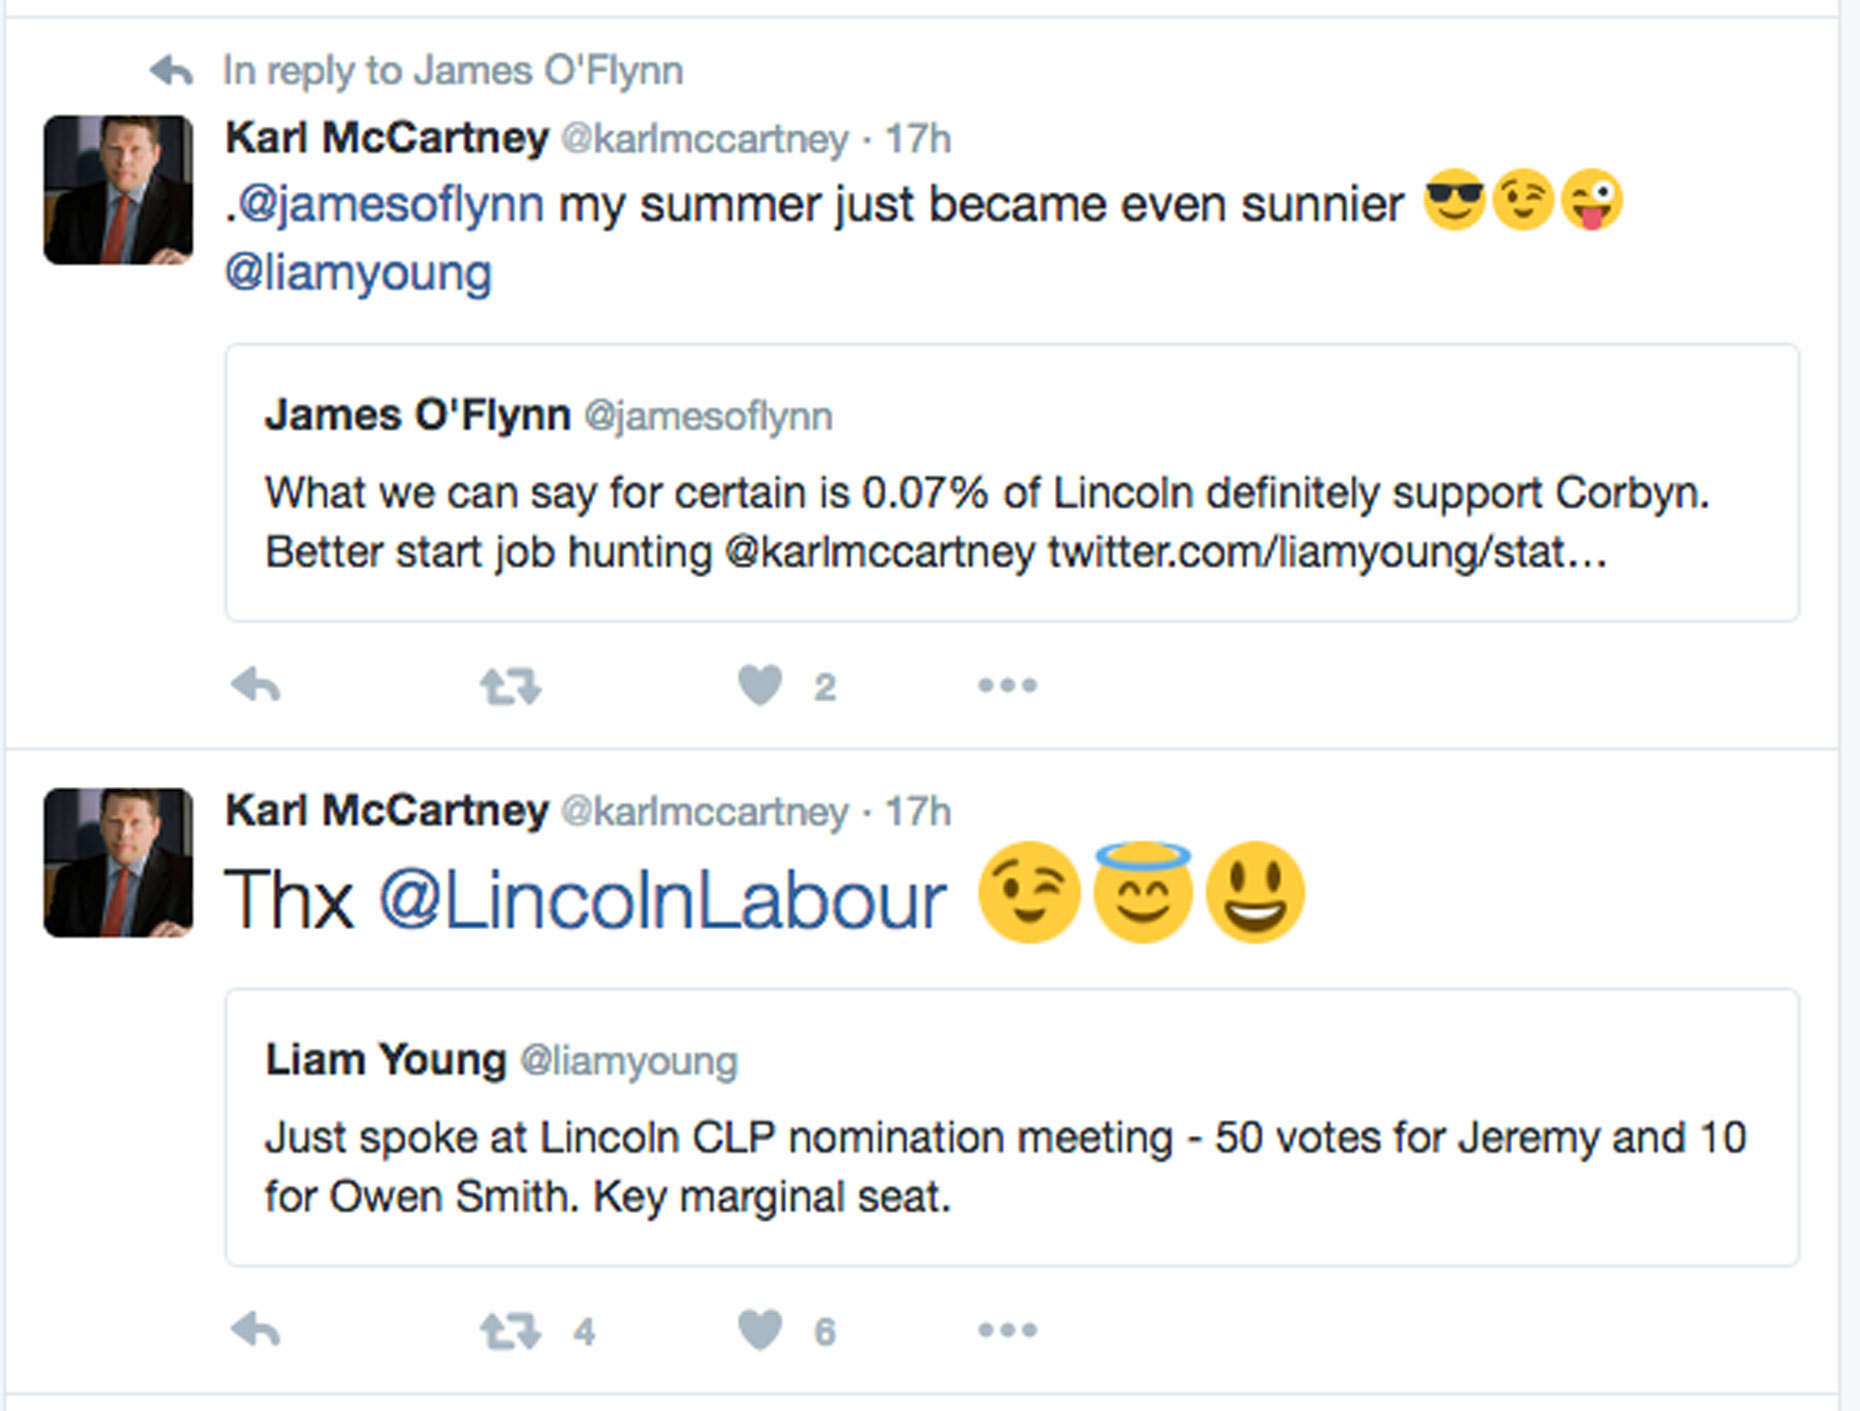 Karl McCartney reacting to Lincoln Labour nominating Jeremy Corbyn